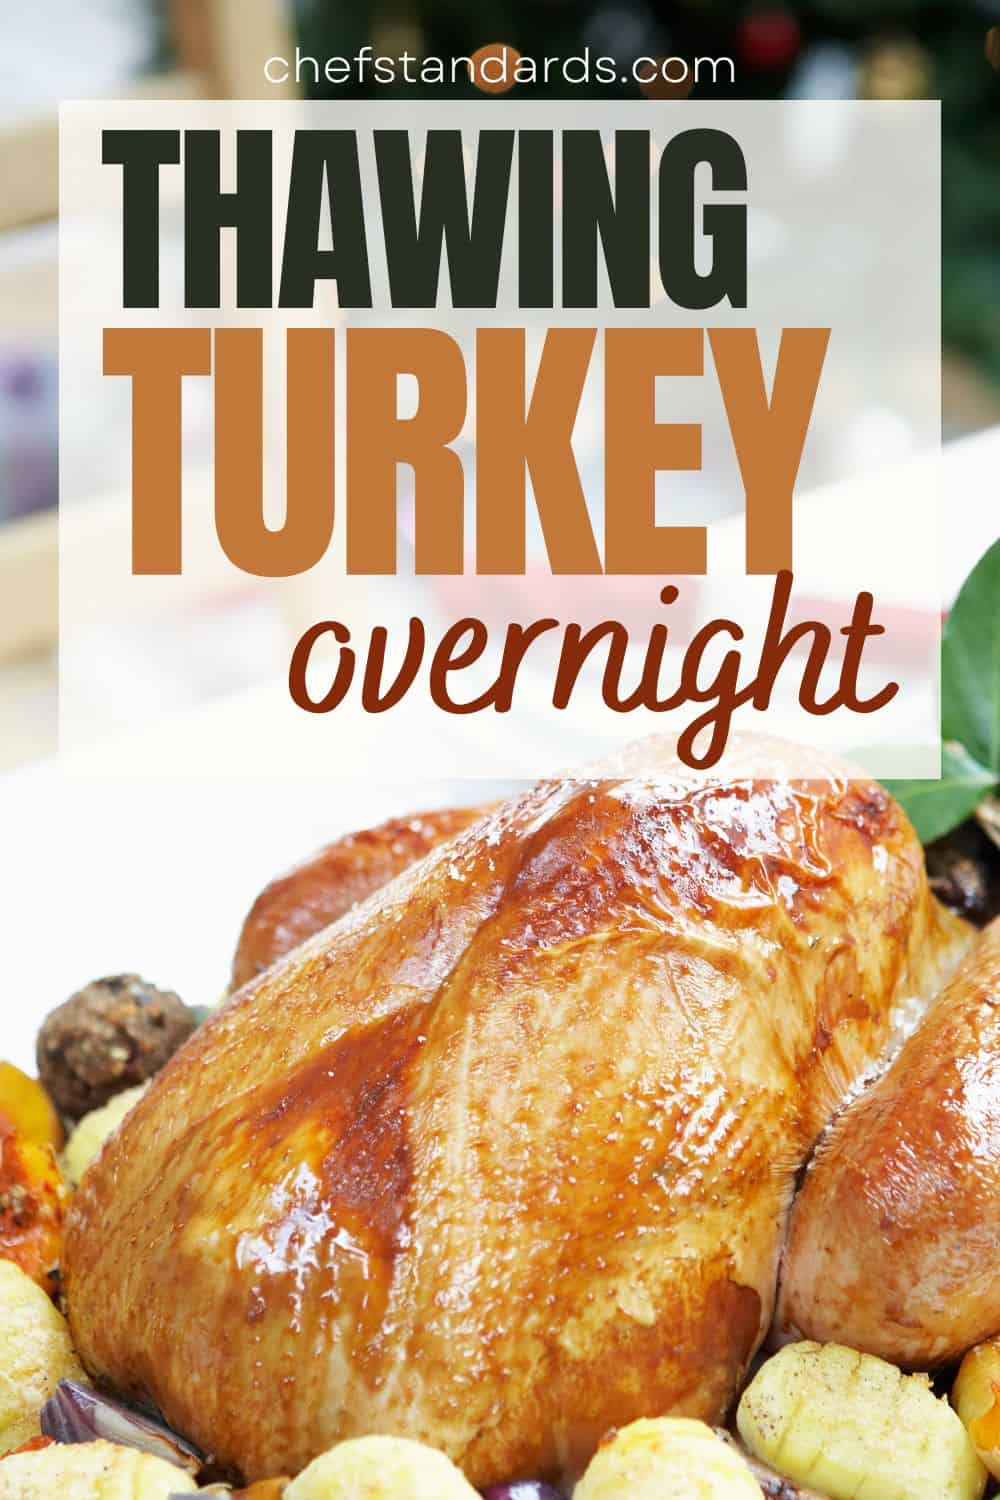 4 Ways To Thaw A Turkey Overnight (From Safest To Fastest!)
